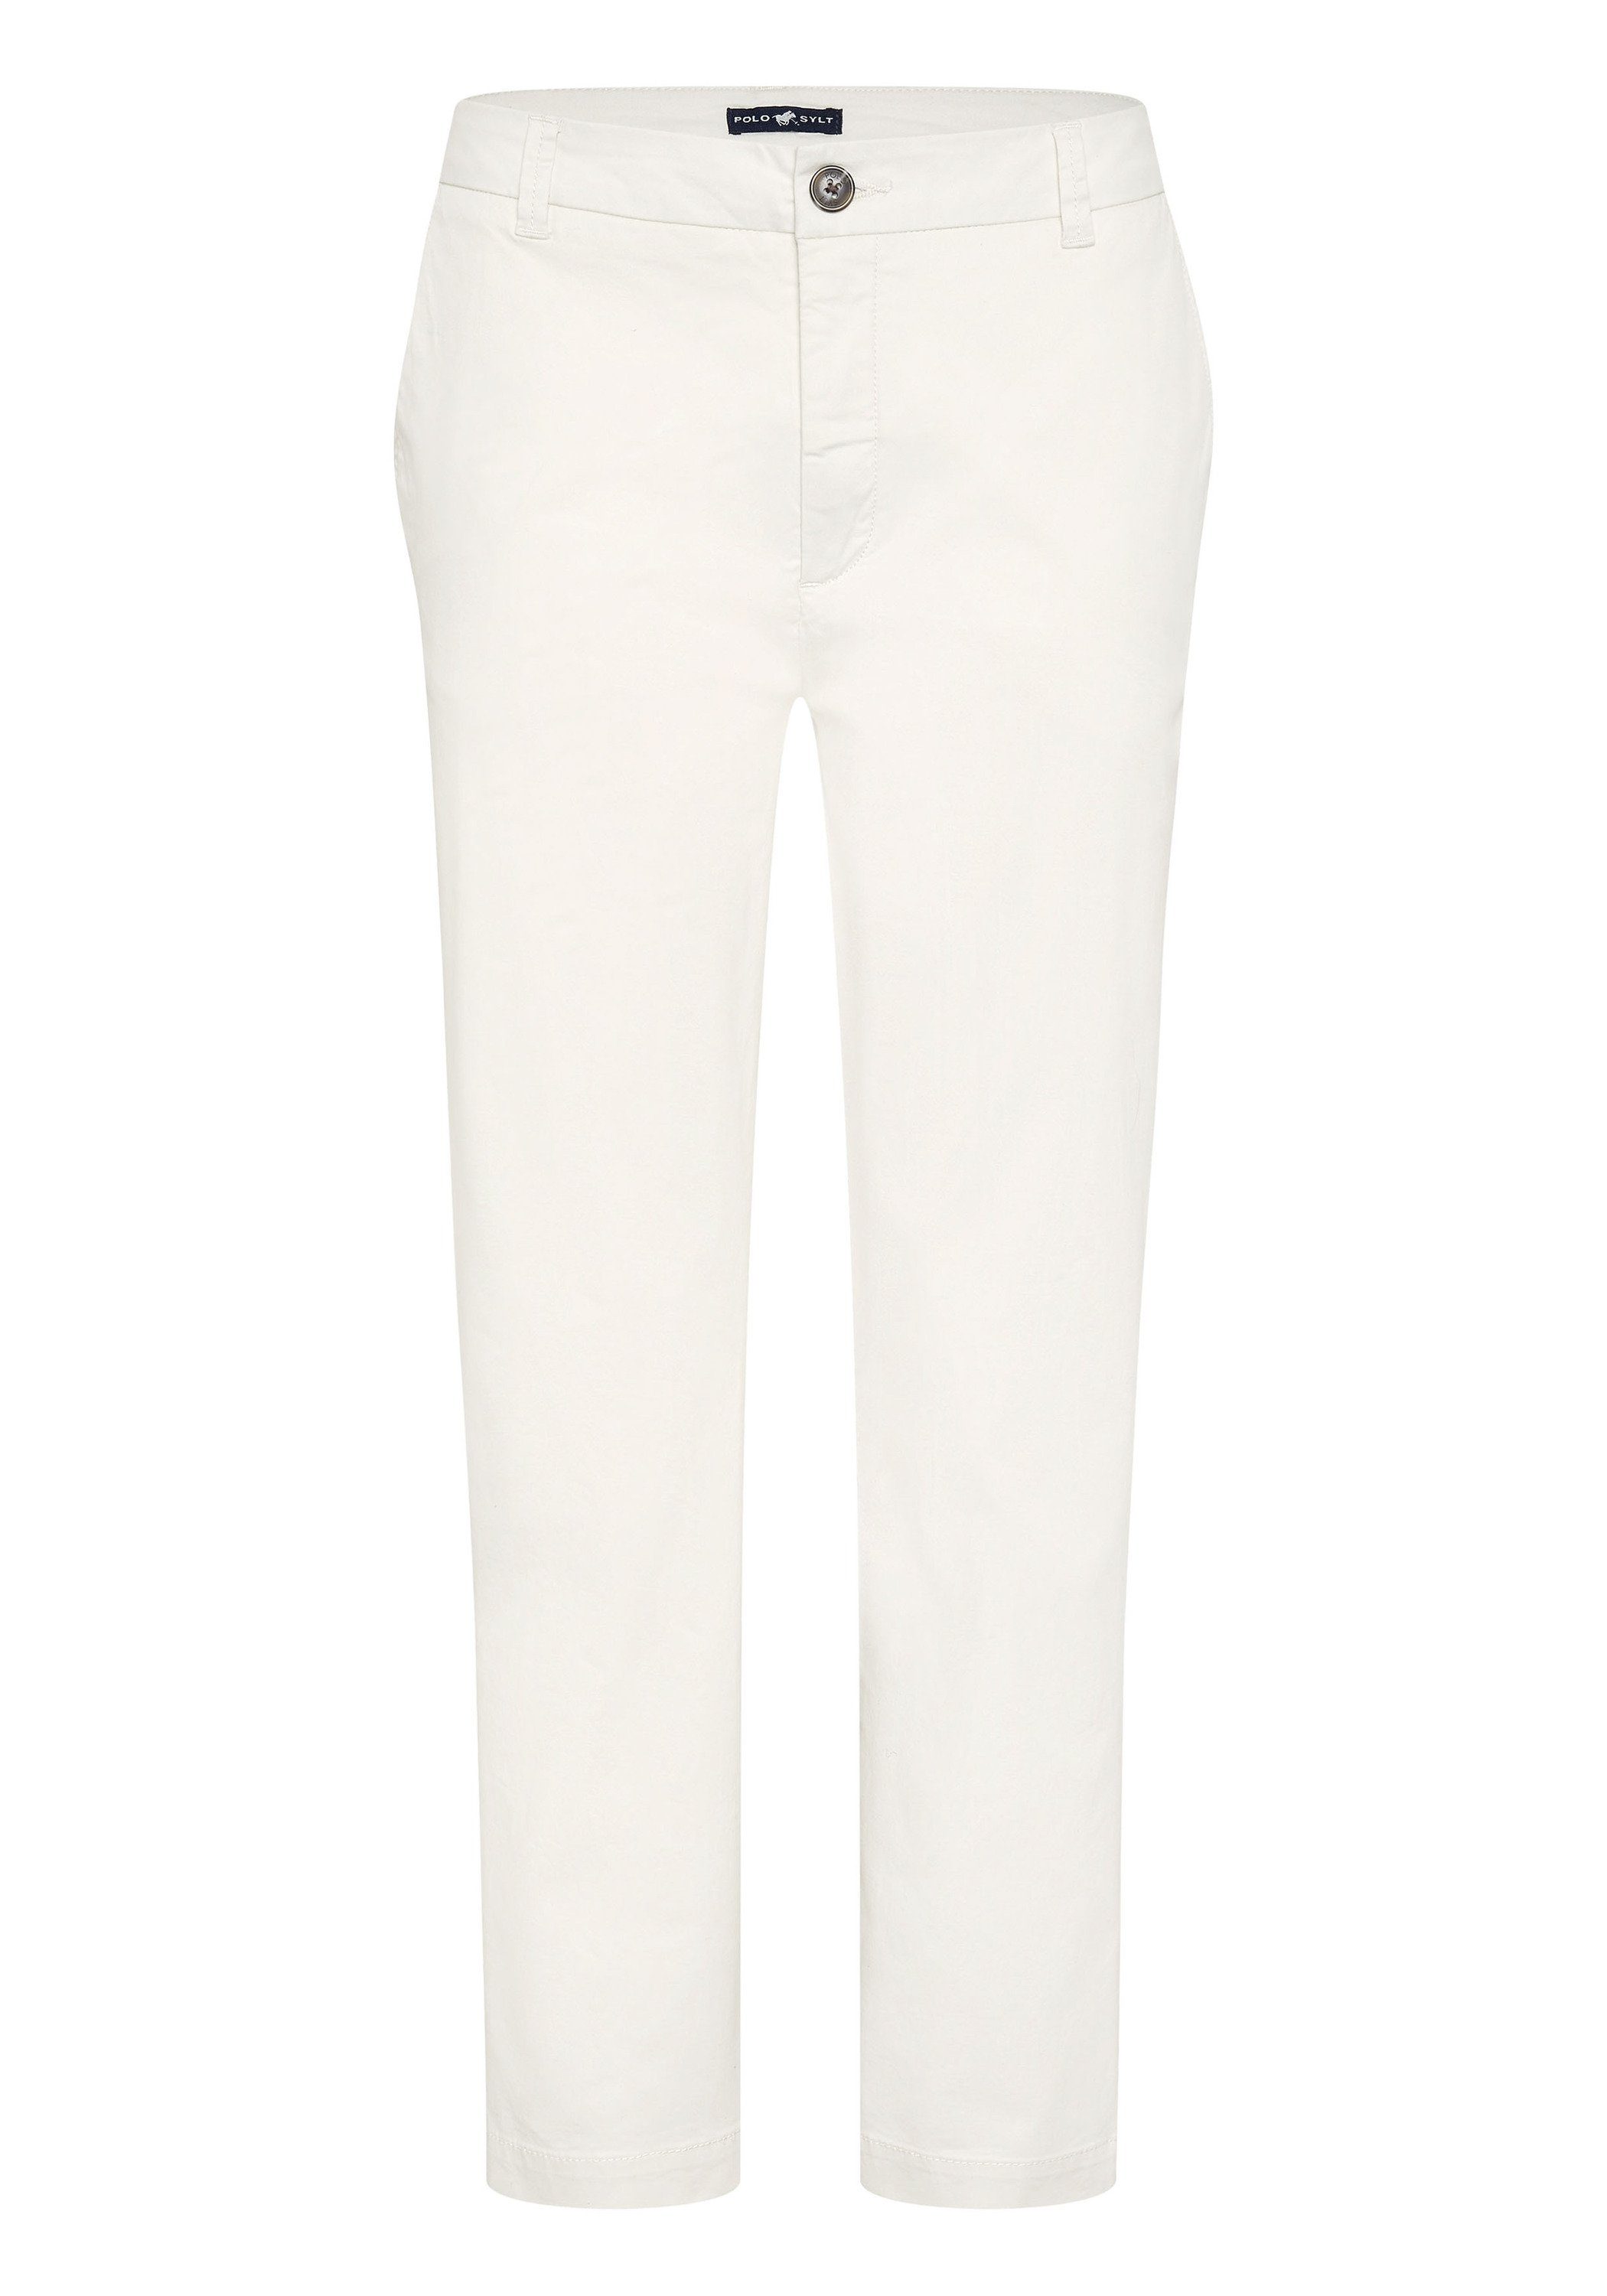 Polo Sylt Chinohose im cleanen Look 11-0701 Whisper White